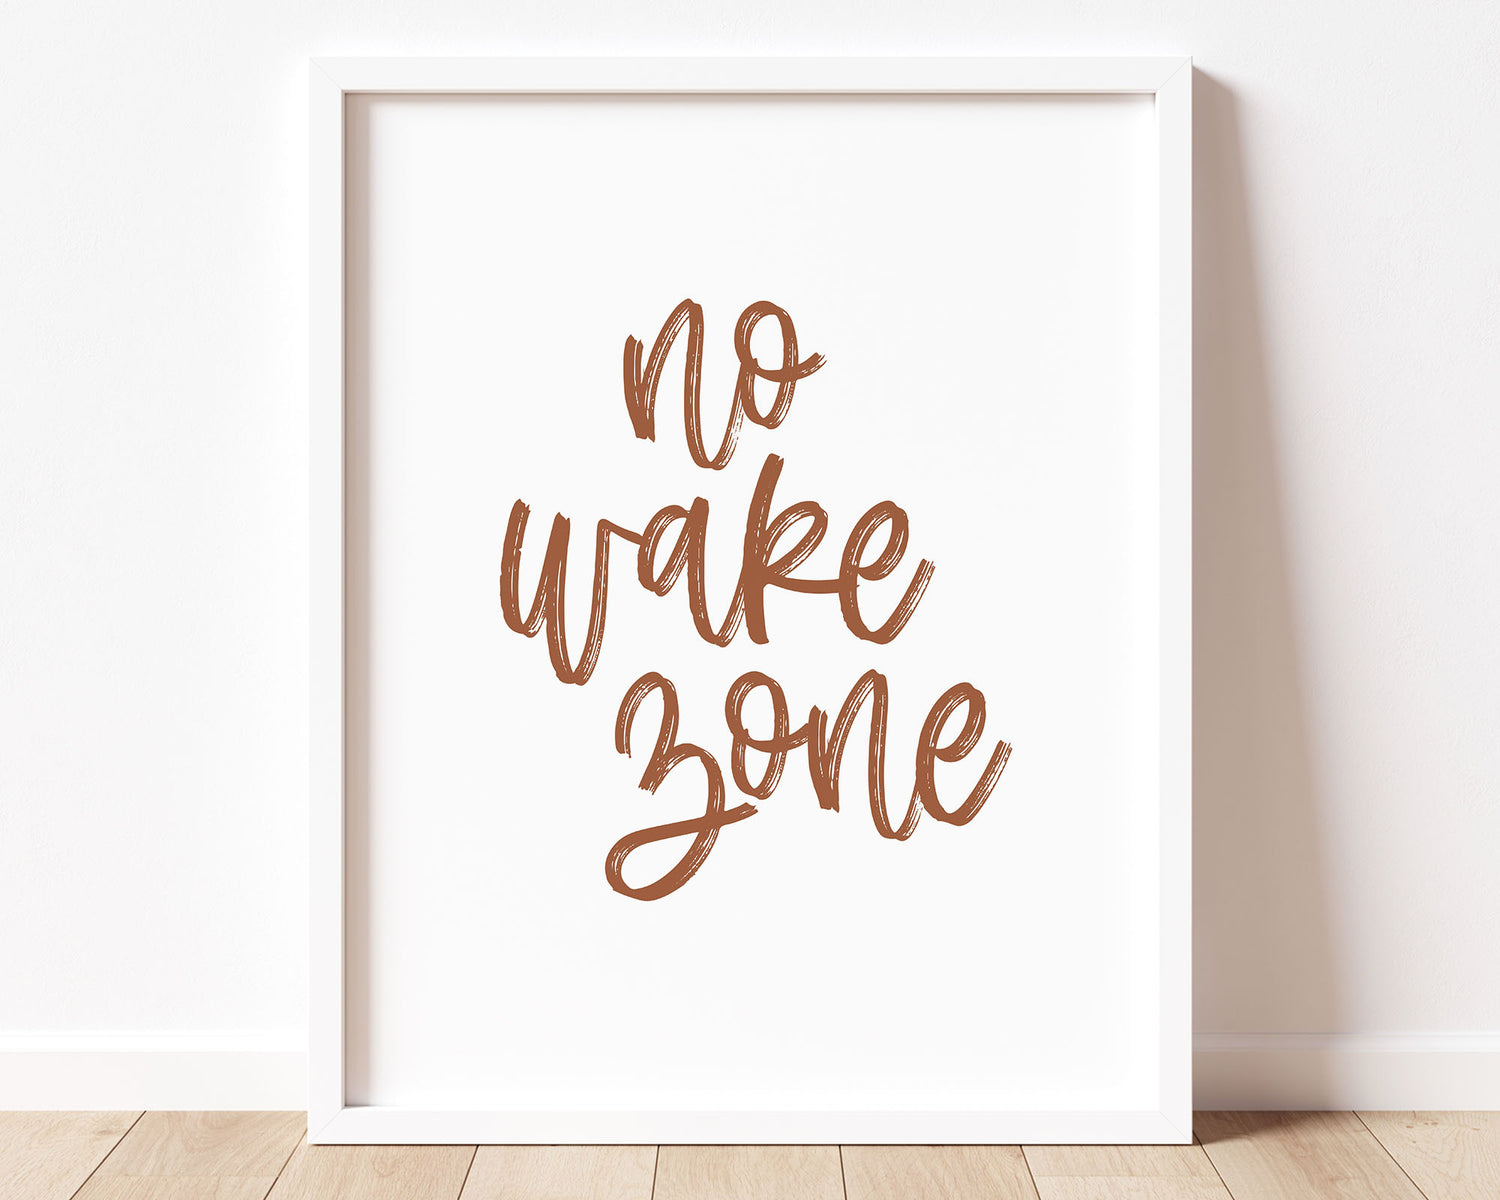 Rust Clay Terracotta earth tone colored No Wake Zone Printable Wall Art featuring a textured brush style cursive lettered quote perfect for Baby Boy Nautical Nursery Decor, Baby Girl Surf Nursery Wall Art, Nautical Kids Bedroom Decor or Children's Coastal Wall Art.